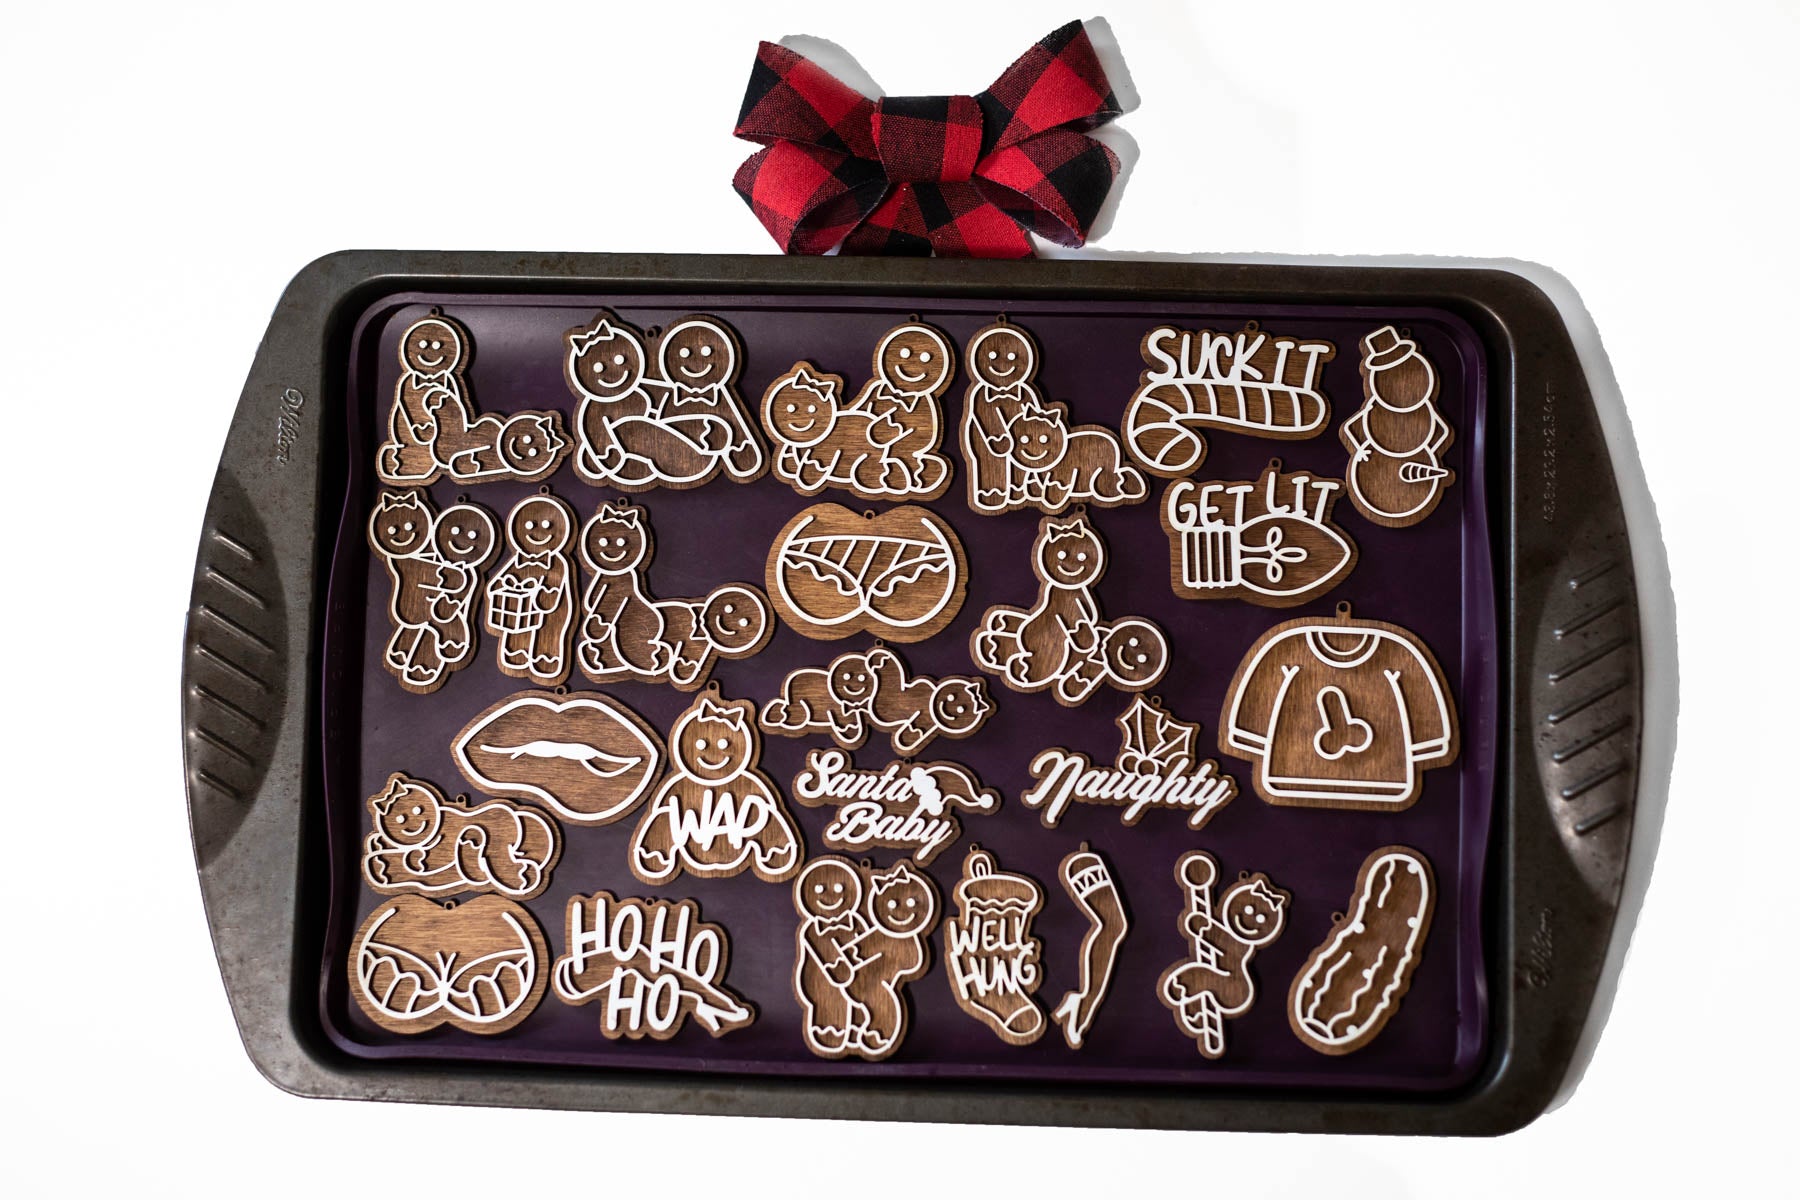 Naughty Gingerbread Cookie Ornaments